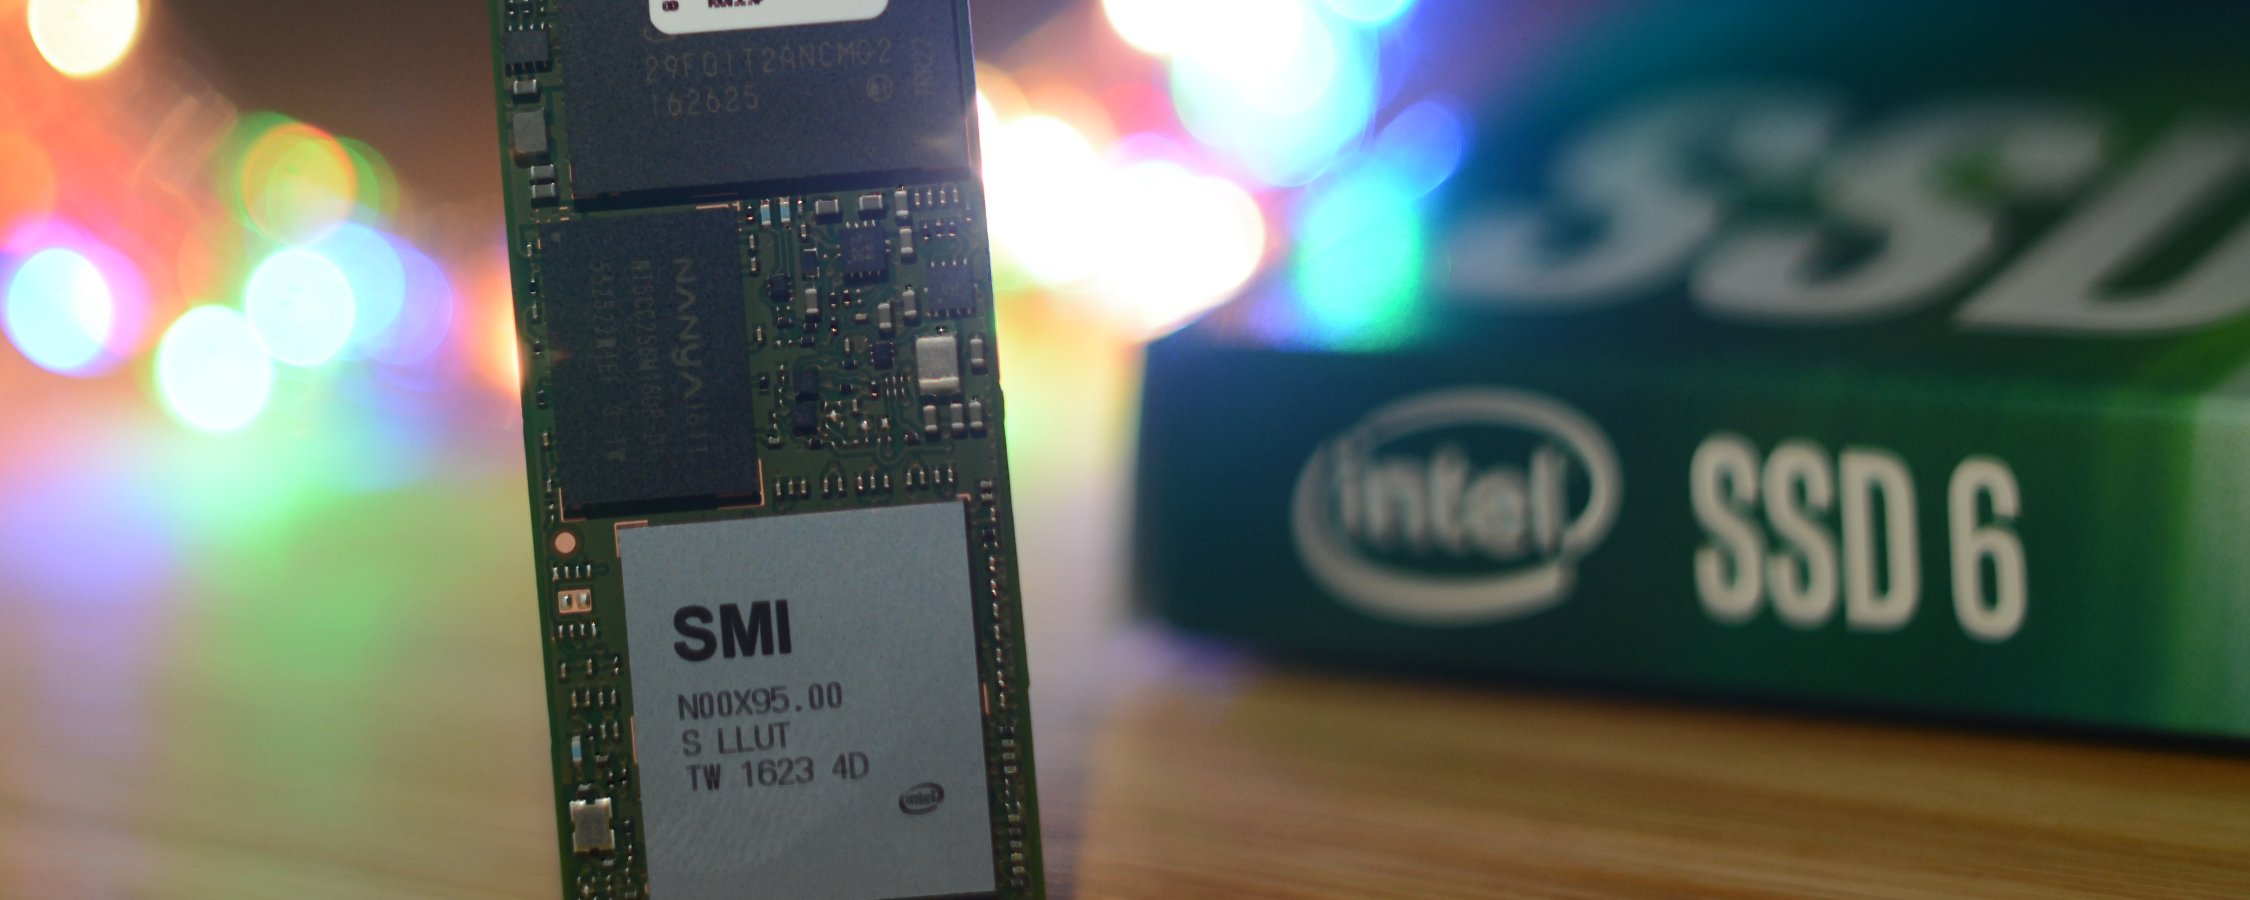 Ancient times Simplicity Personal Intel SSD 600p Series 512GB Review | TechSpot